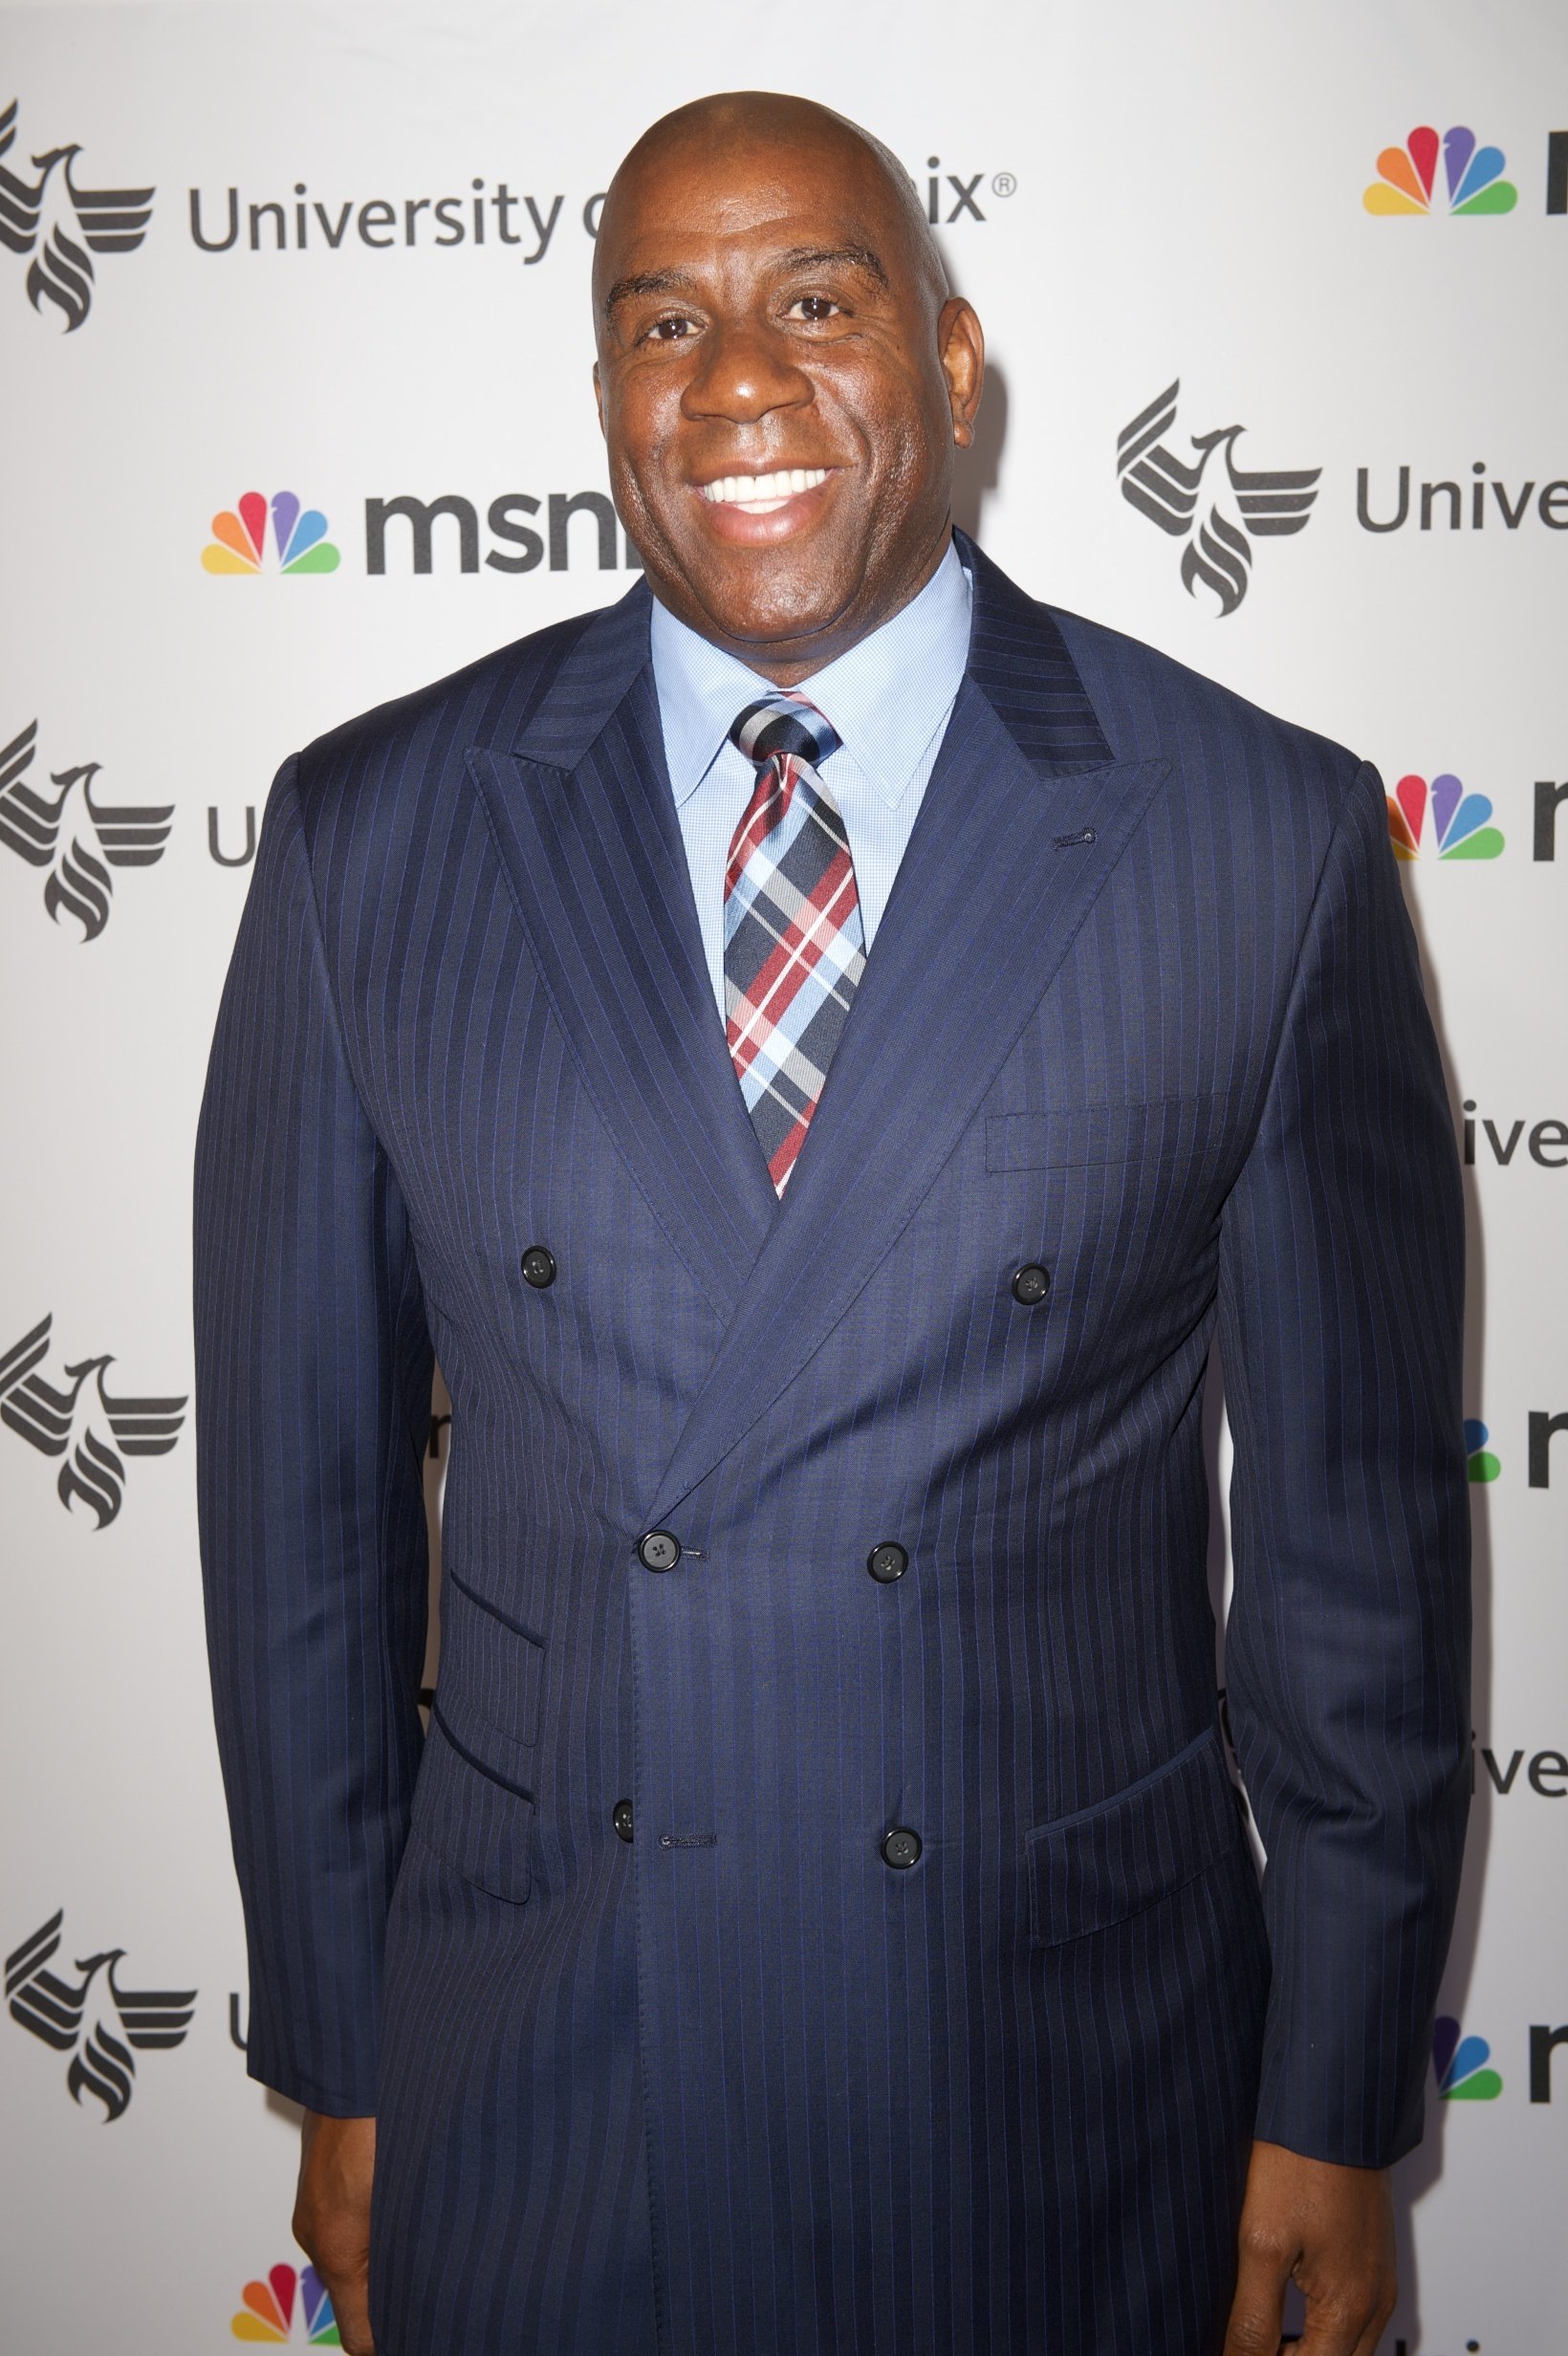 Magic Johnson attends the "Advancing The Dream" event at The Apollo Theater on September 6, 2013. | Photo: Getty Images